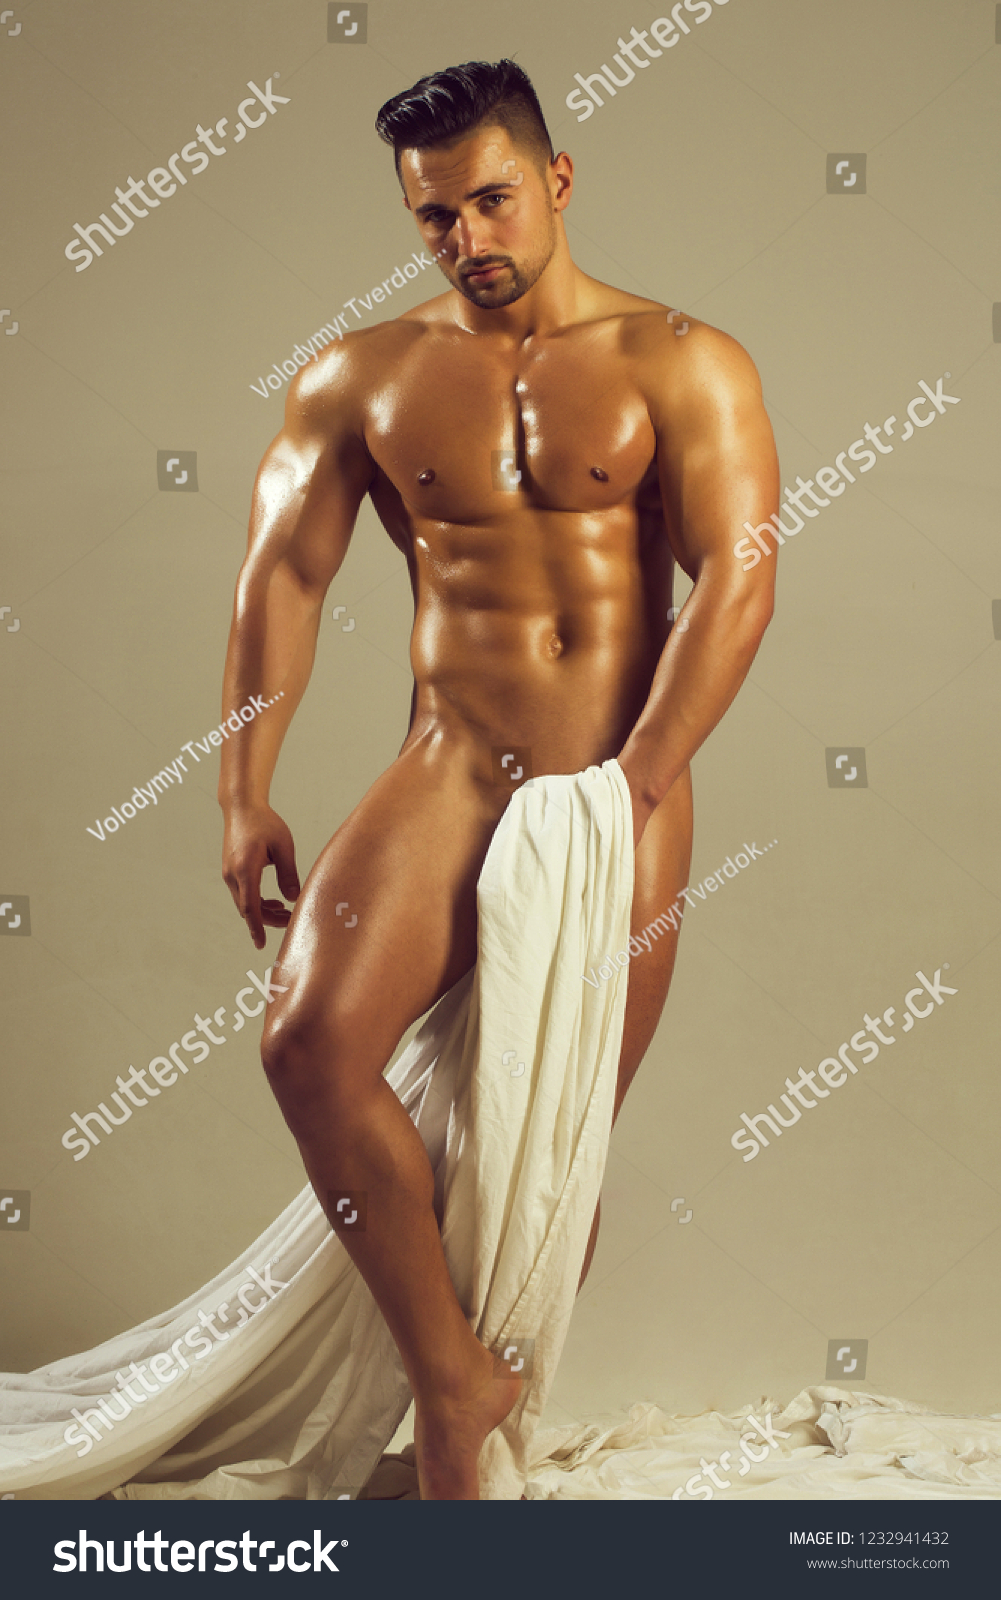 Hot Muscle Man Nude